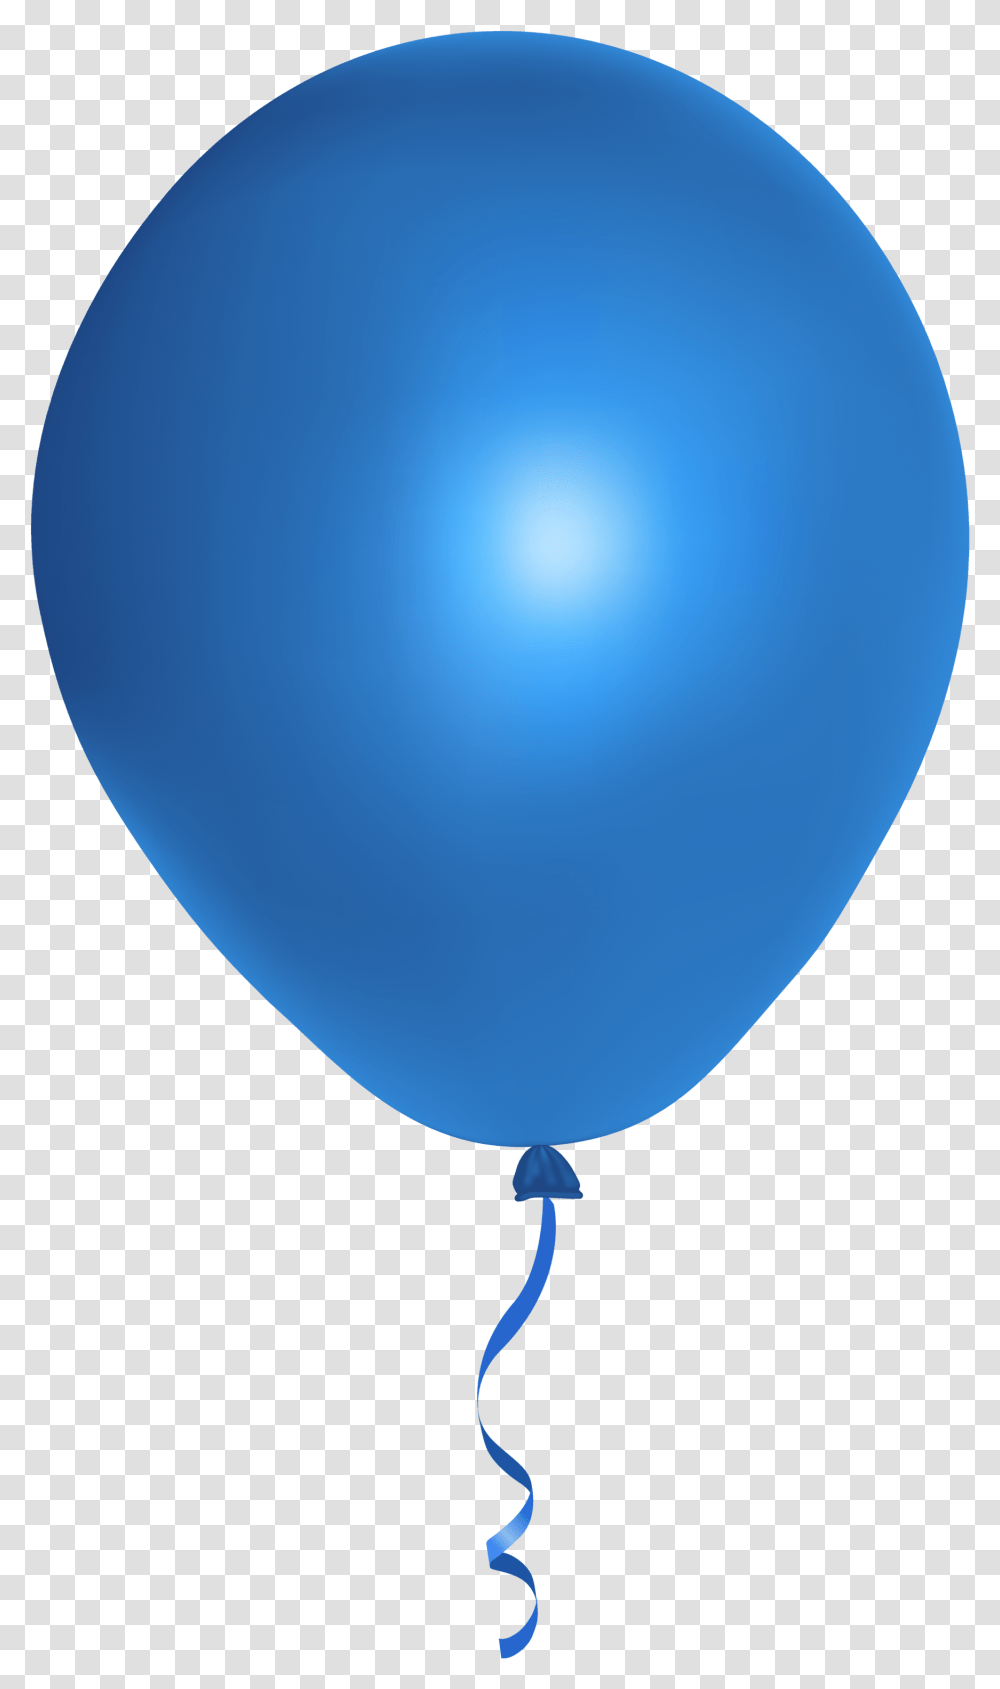 Background Blue Balloon Transparent Png